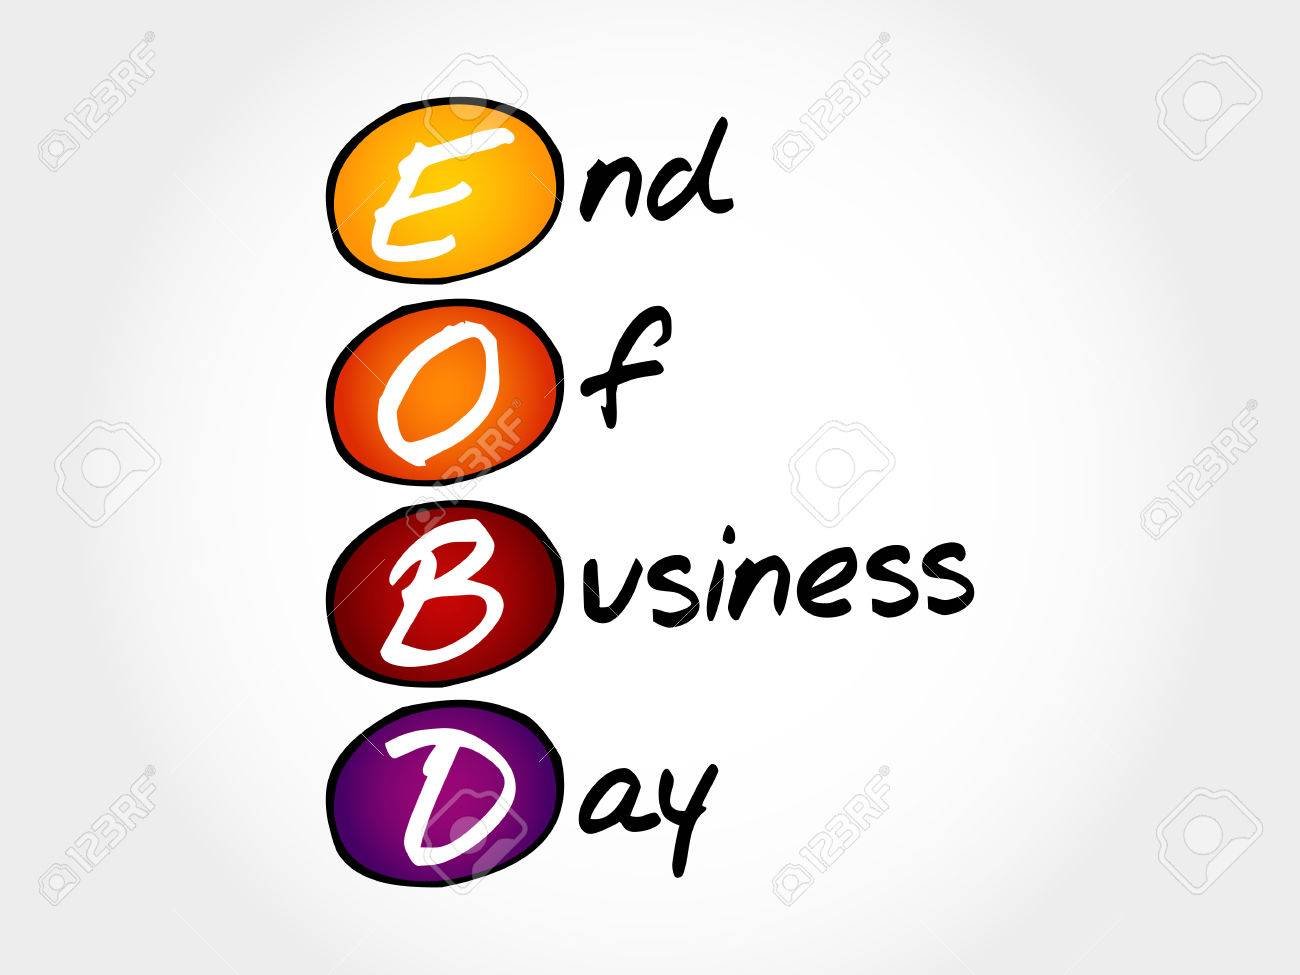 At The Close: Strategies For Managing End Of Business Day